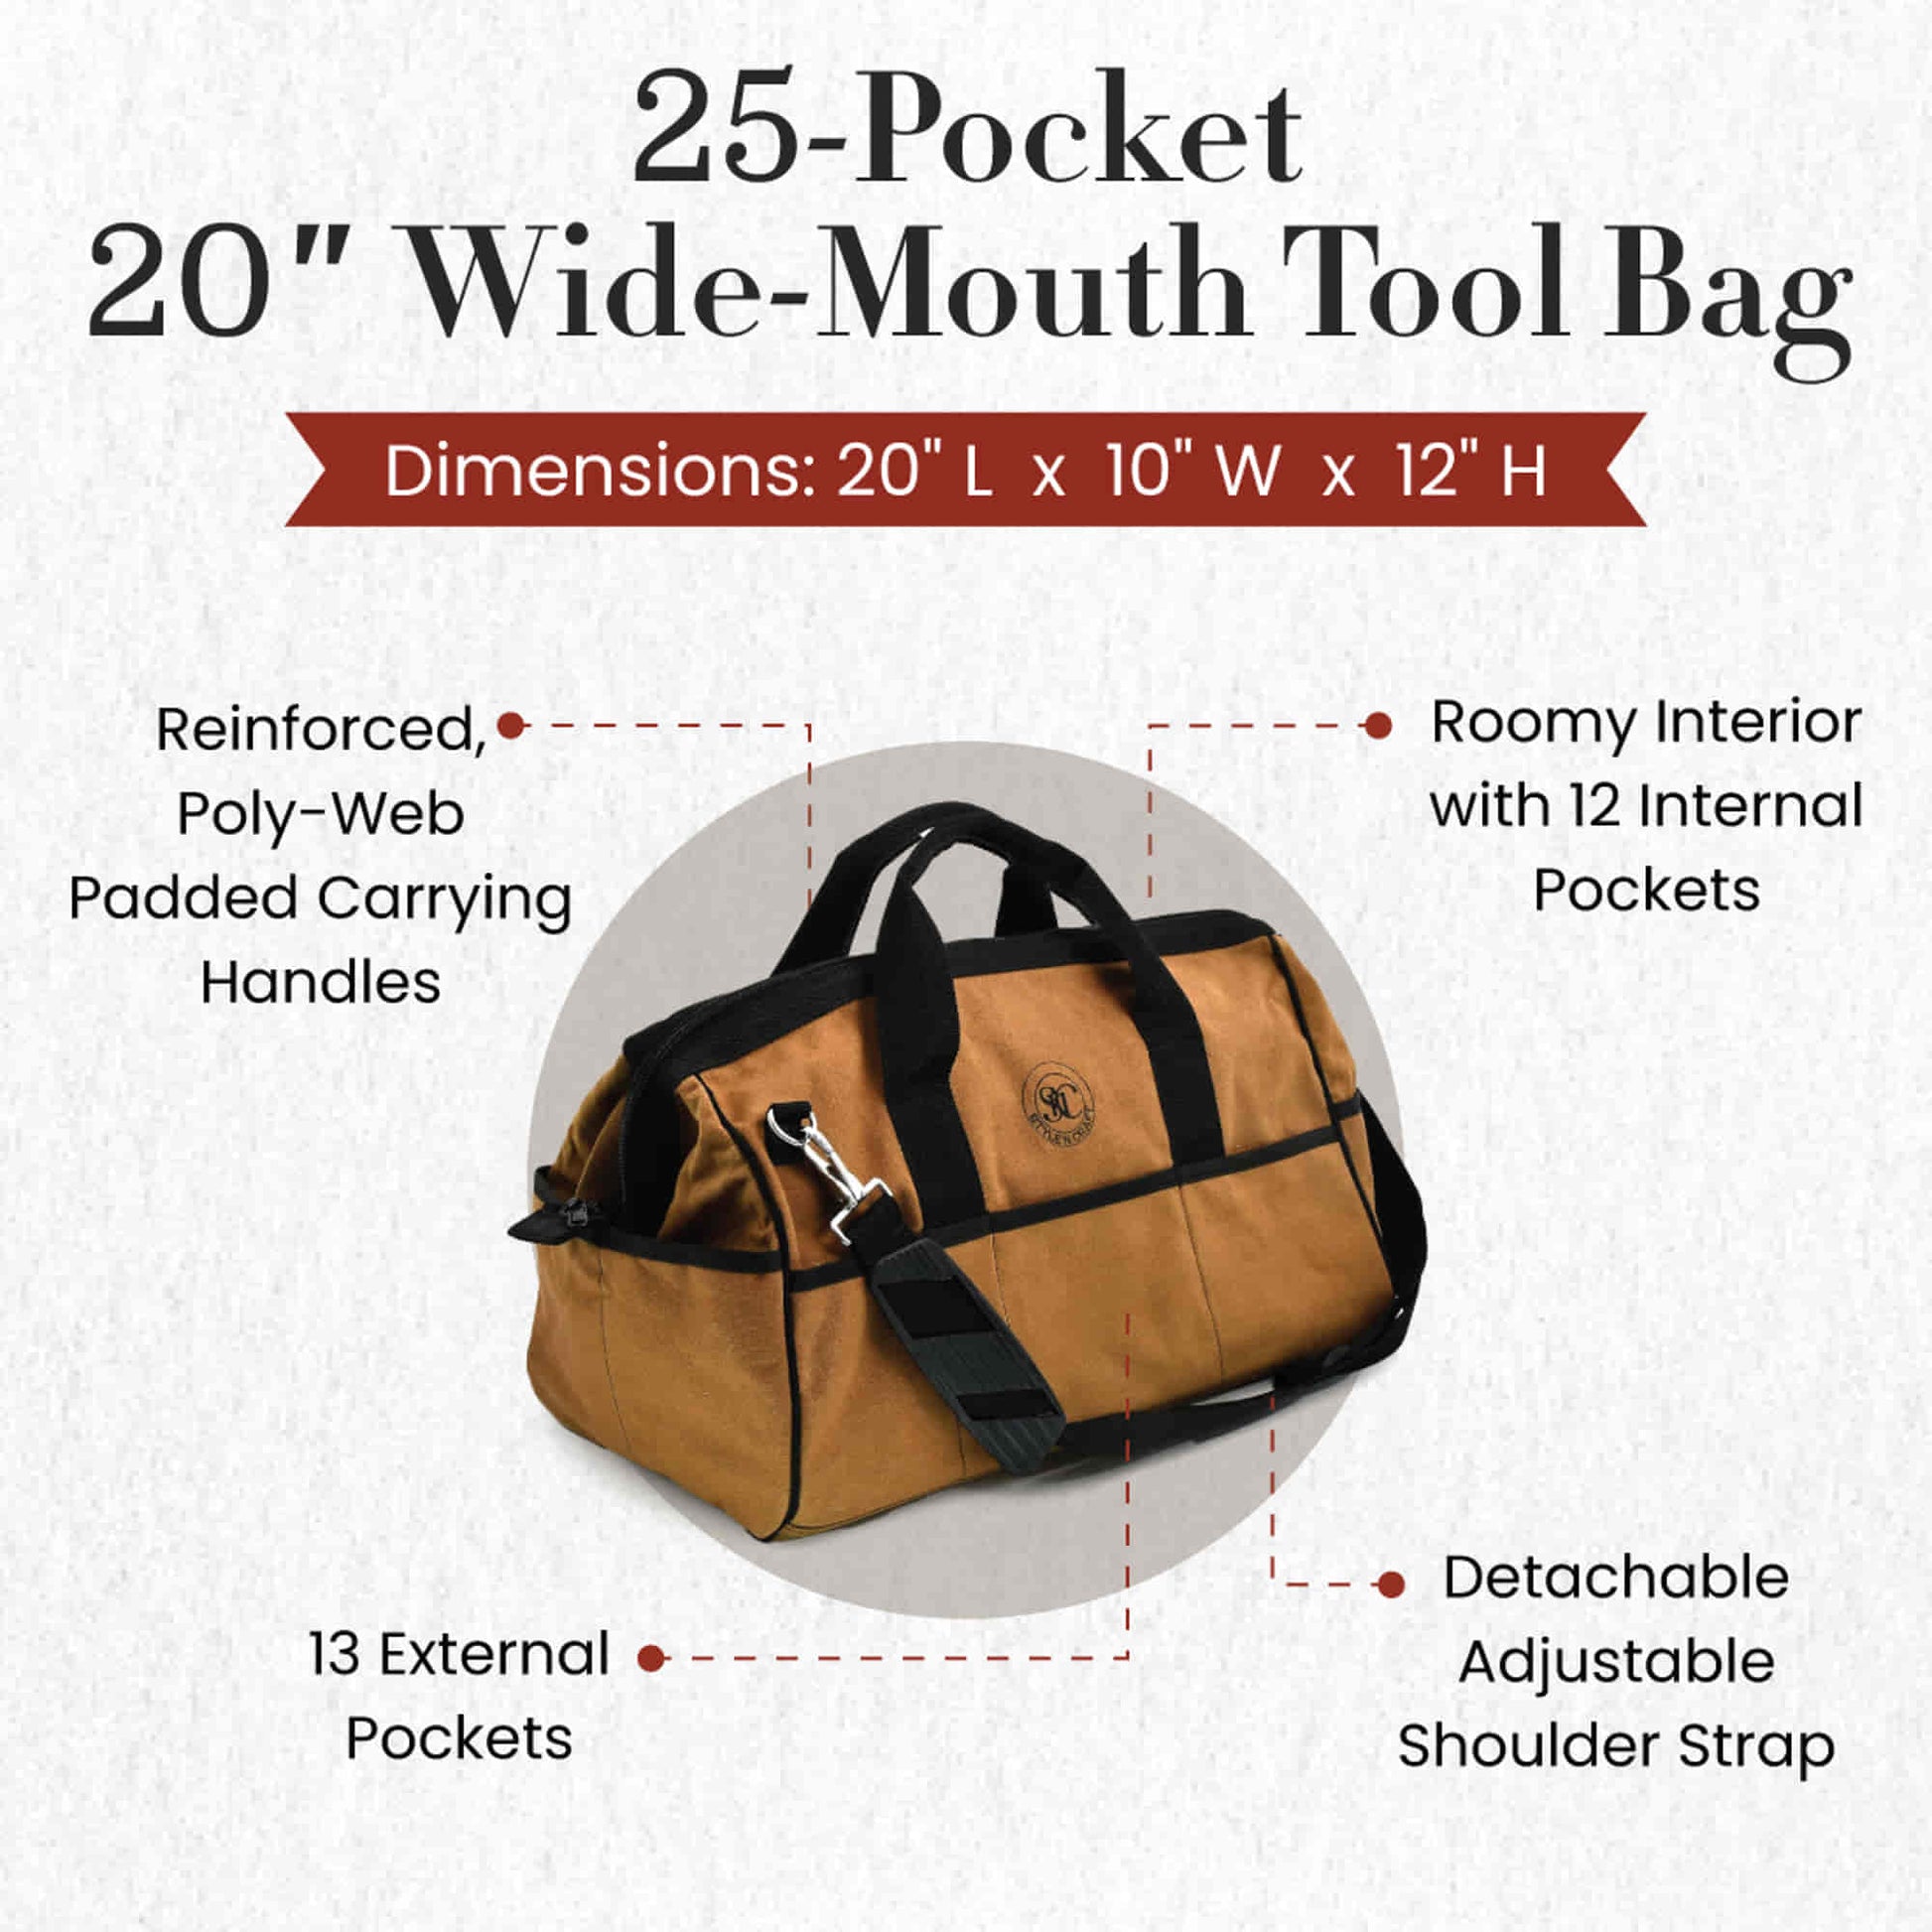 Style n Craft 97012 - 25 Pocket 20 Inch Wide Mouth Tool Bag in Brown Waterproof Canvas with Black Binding - Front Angled View Showing the Details - External Front & Side Pockets, Padded Shoulder Strap, Carry Handles